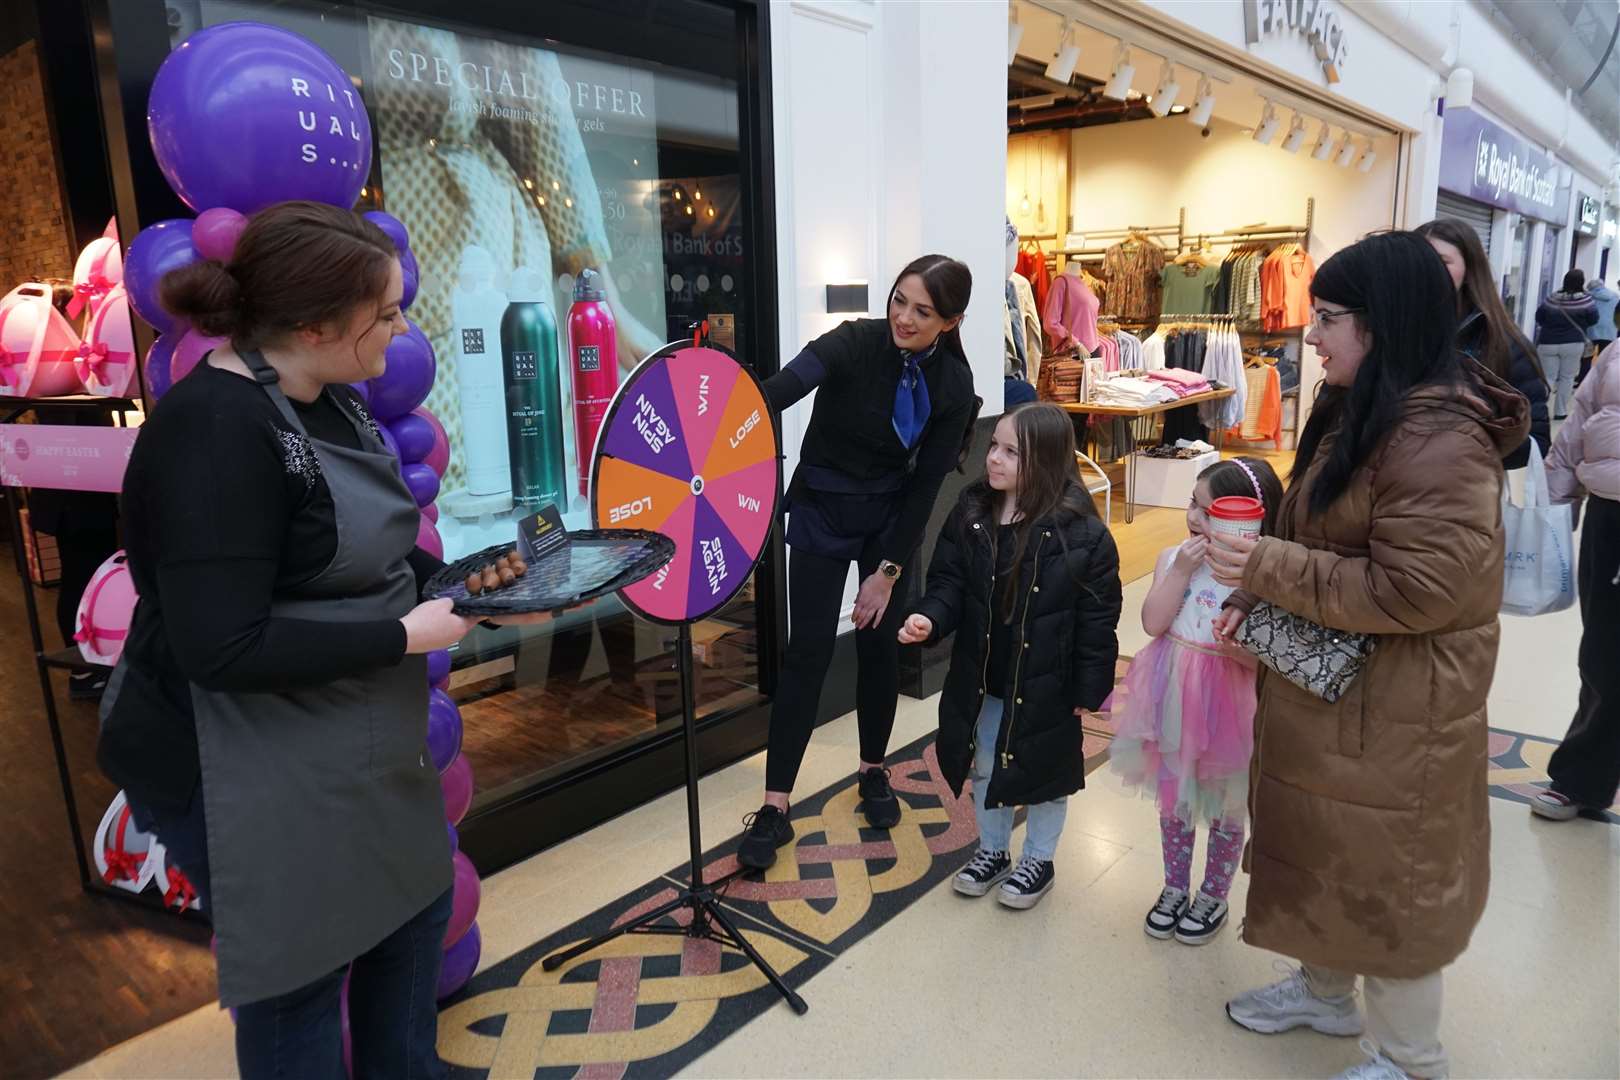 Spinning the wheel to get a chocolate treat. Picture: Federica Stefani.